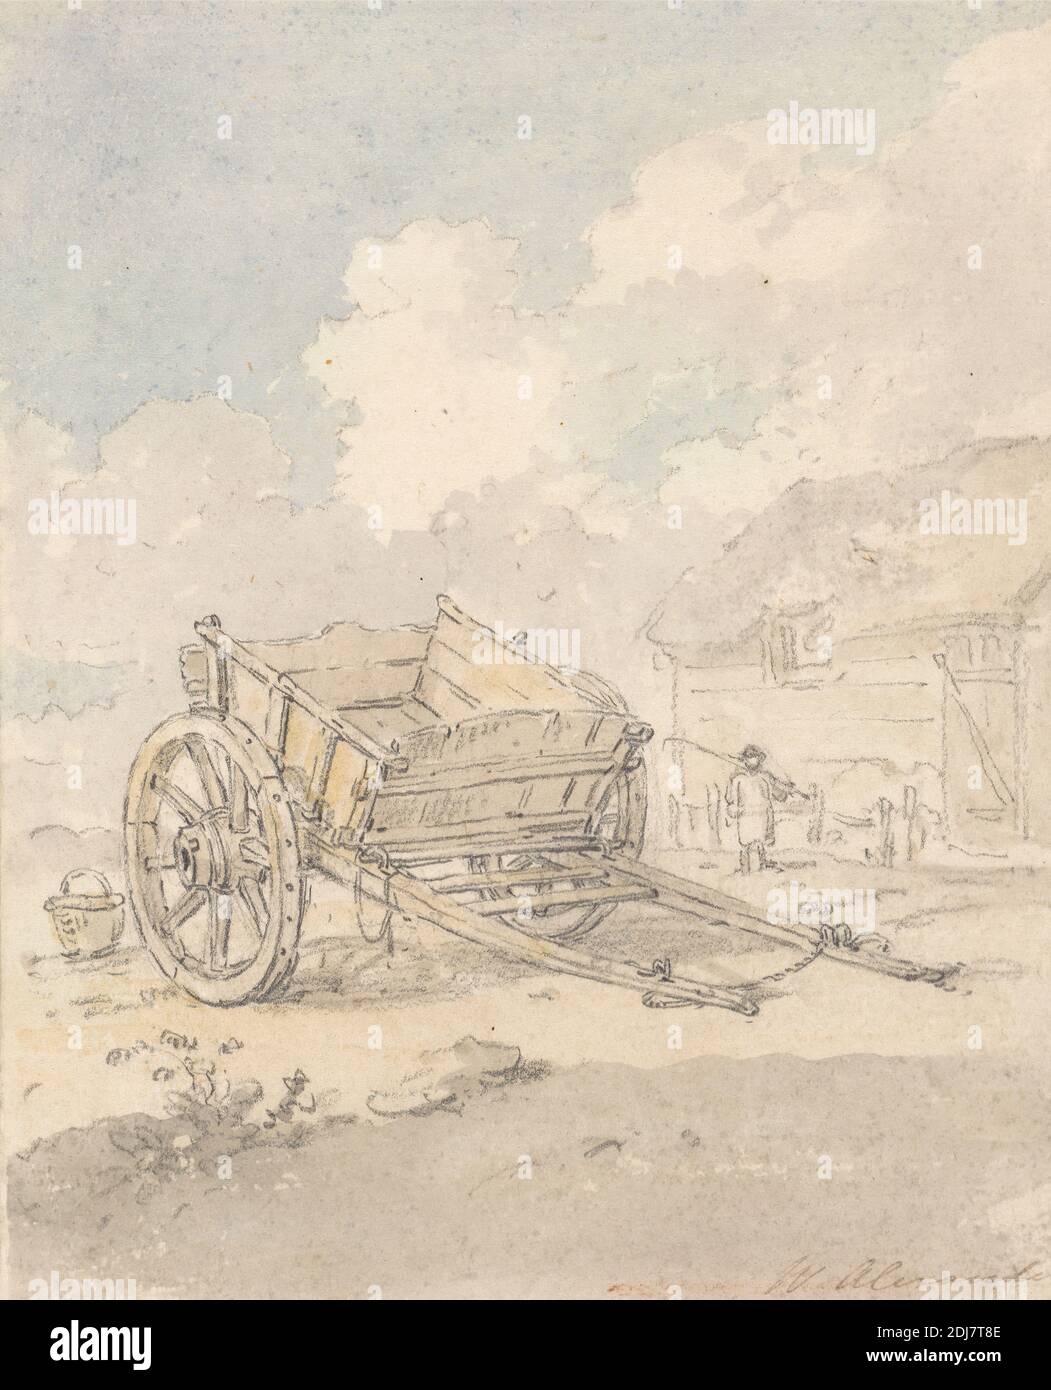 Study of a Farm Cart, William Alexander, 1767–1816, British, undated, Watercolor and graphite on moderately thick, moderately textured, cream laid paper, Sheet: 6 1/8 × 5 inches (15.6 × 12.7 cm), agriculture, basket, cart, farmhouse, figure, genre subject, wagon Stock Photo